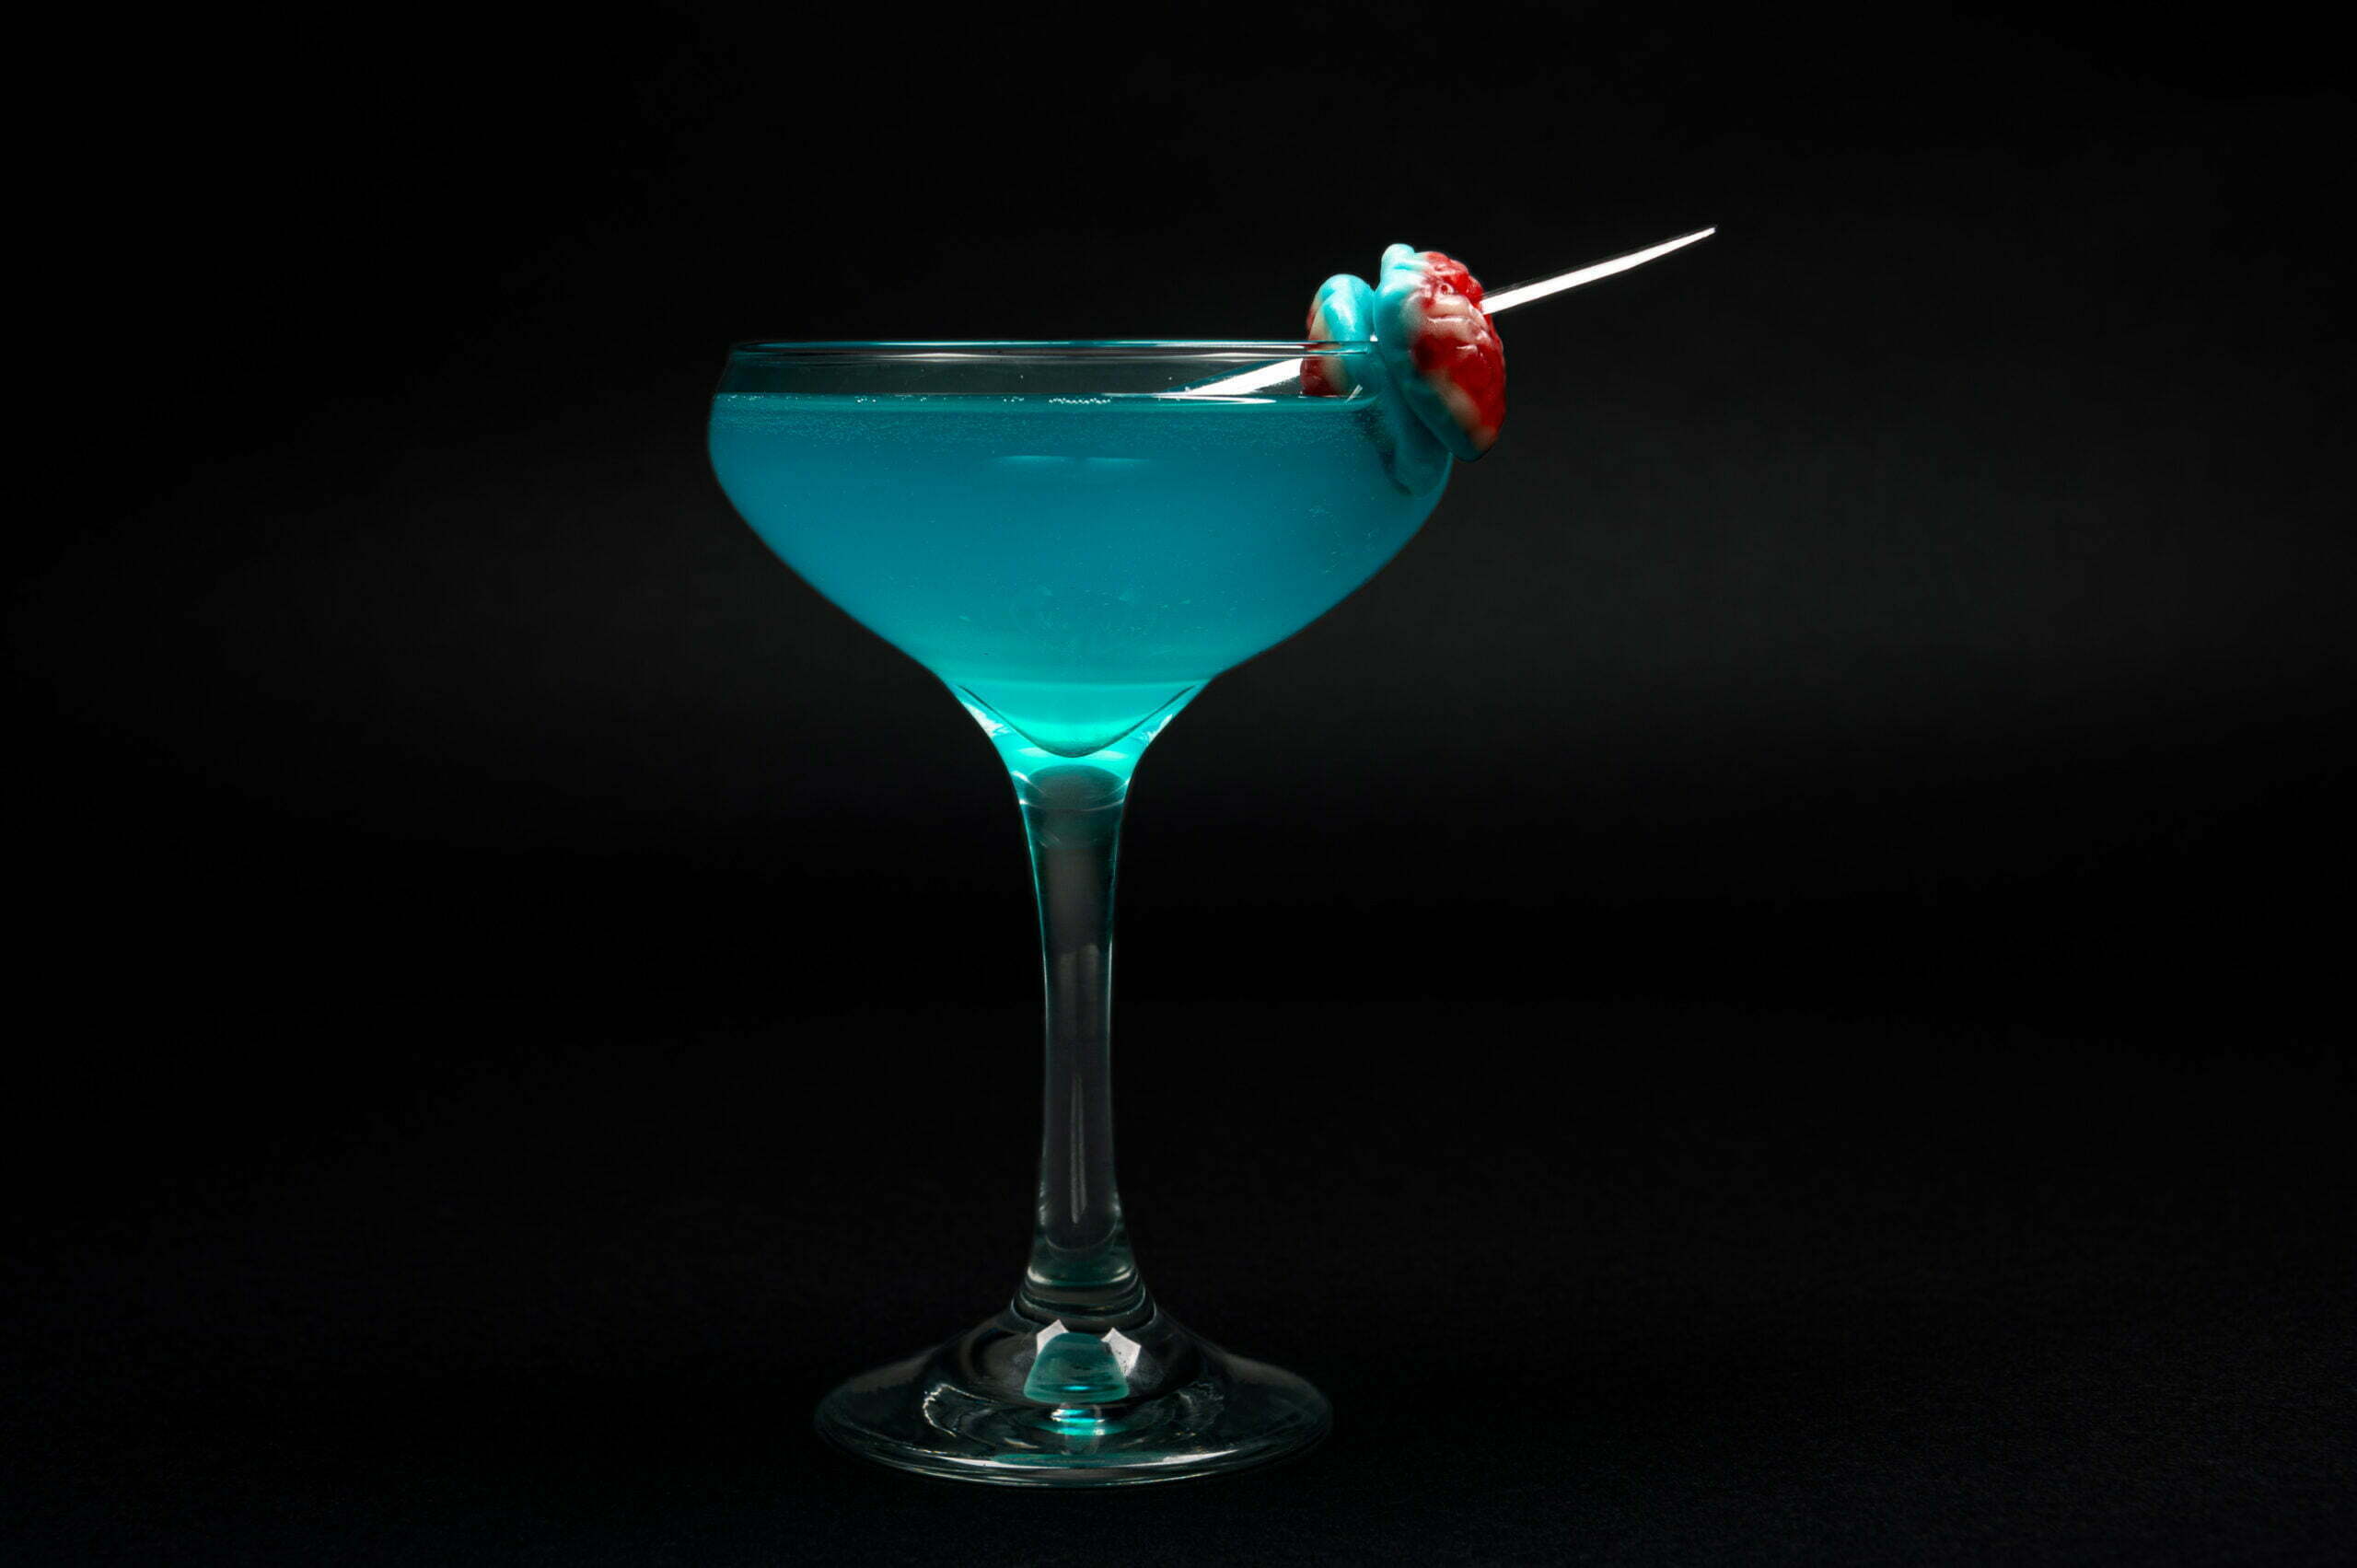 Zom-B margarita features Casamigos Blanco Tequila, Blue Curaçao, agave and fresh lime.